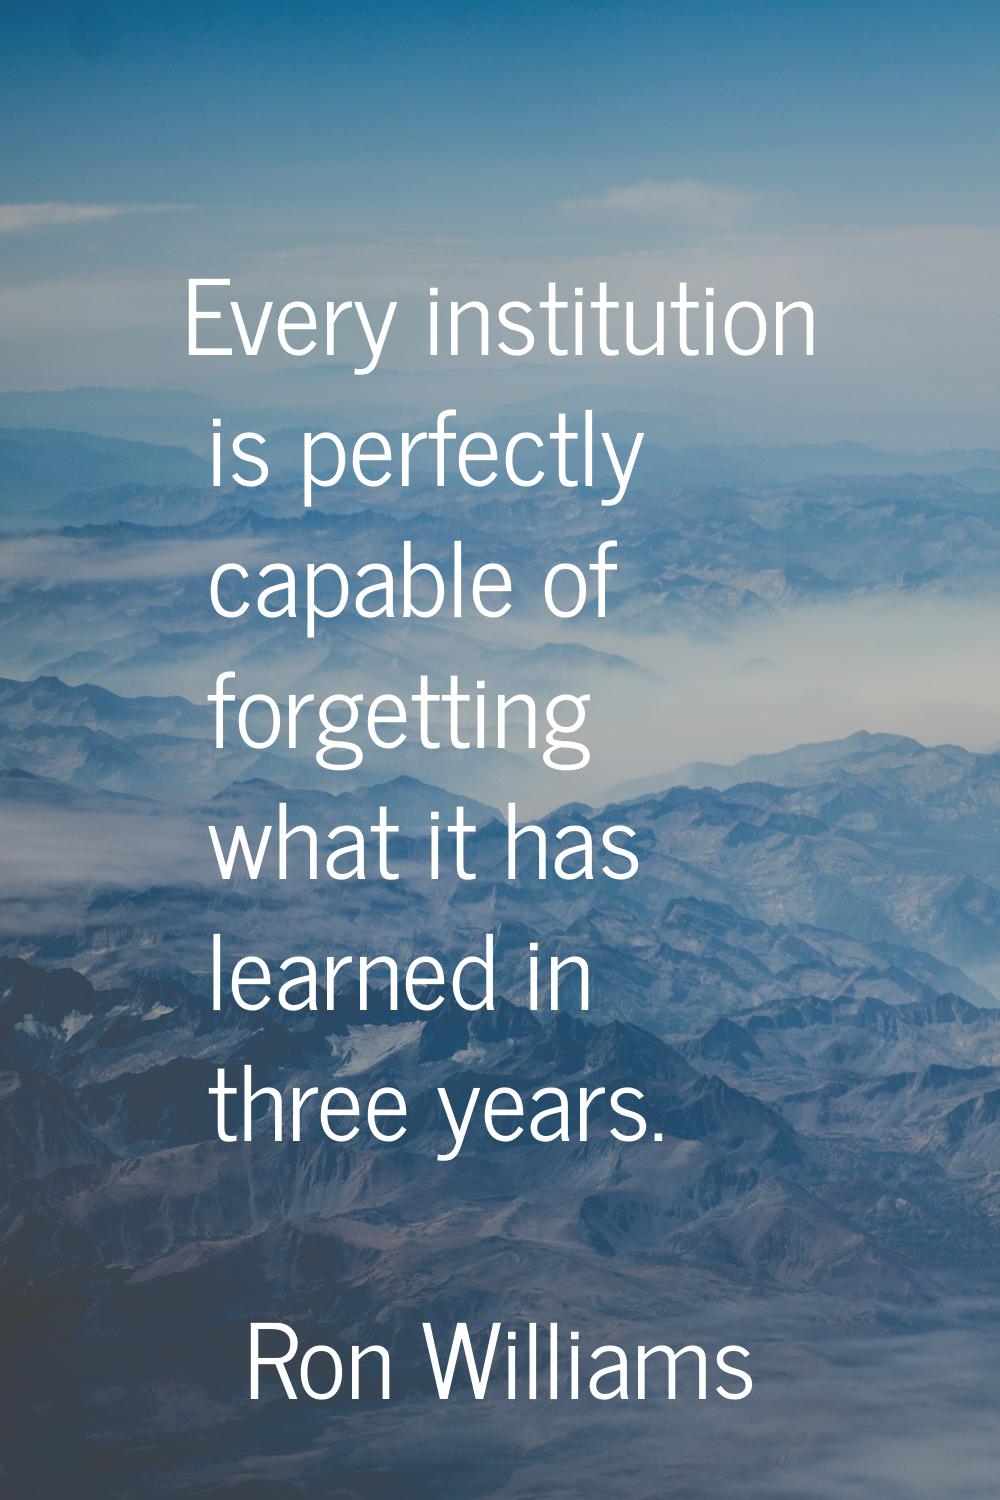 Every institution is perfectly capable of forgetting what it has learned in three years.